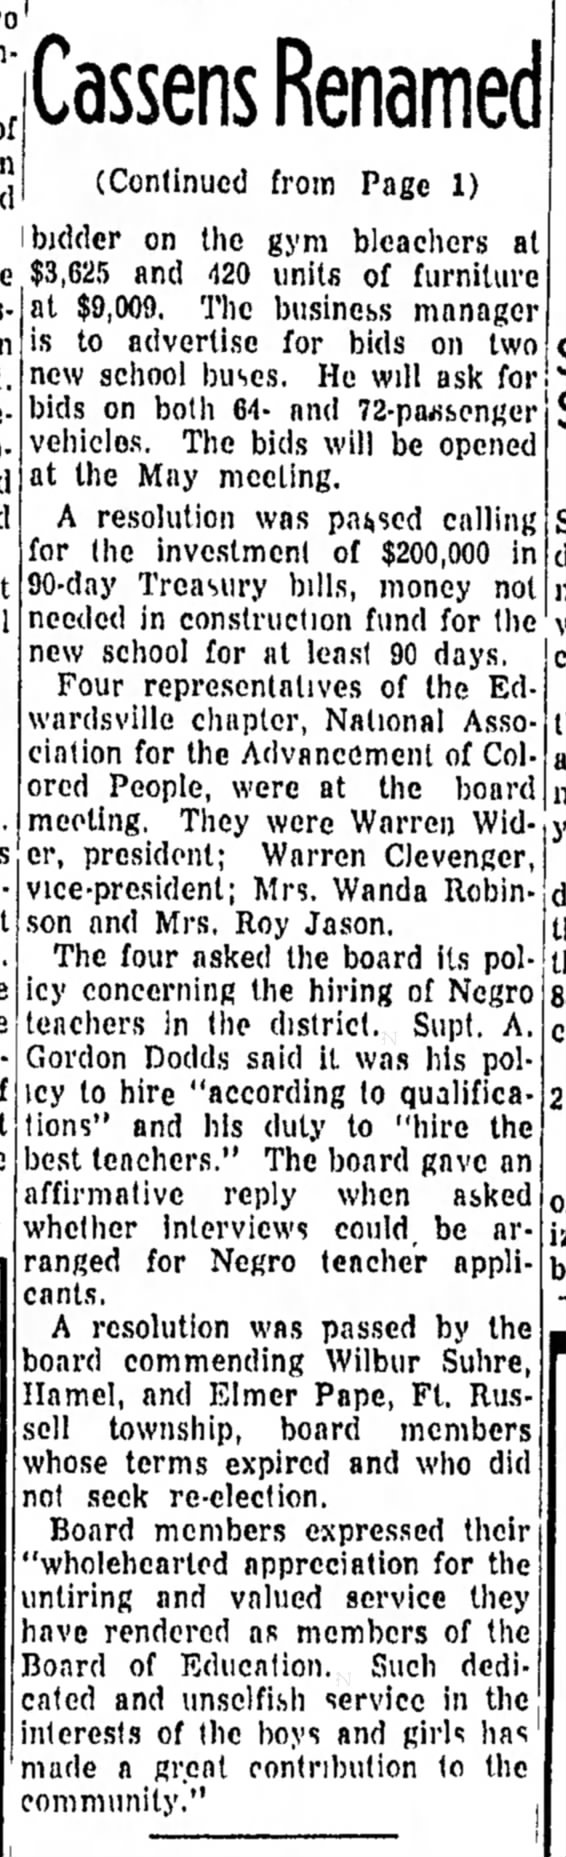 NAACP Asks Board of Education 
To View Negro Applications